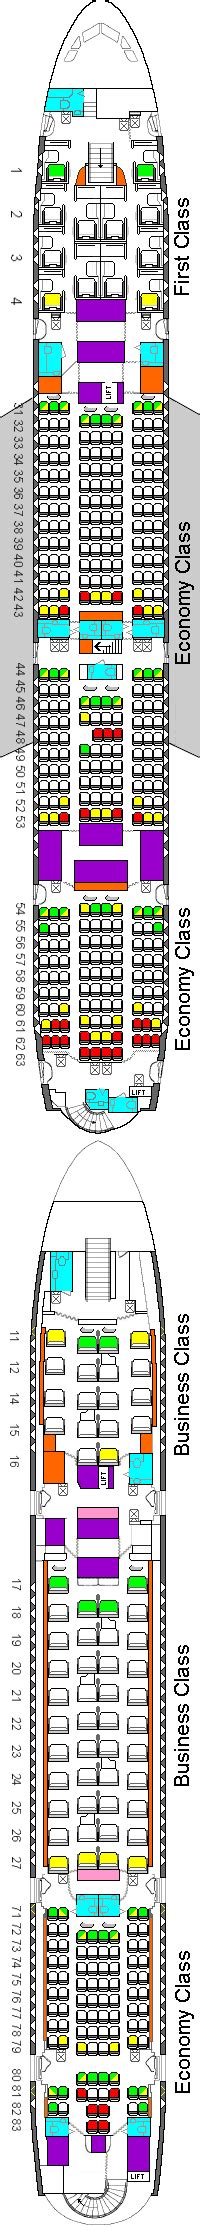 Singapore Airlines A380 Seating Plan Sq Seat Pictures And Floor Plan